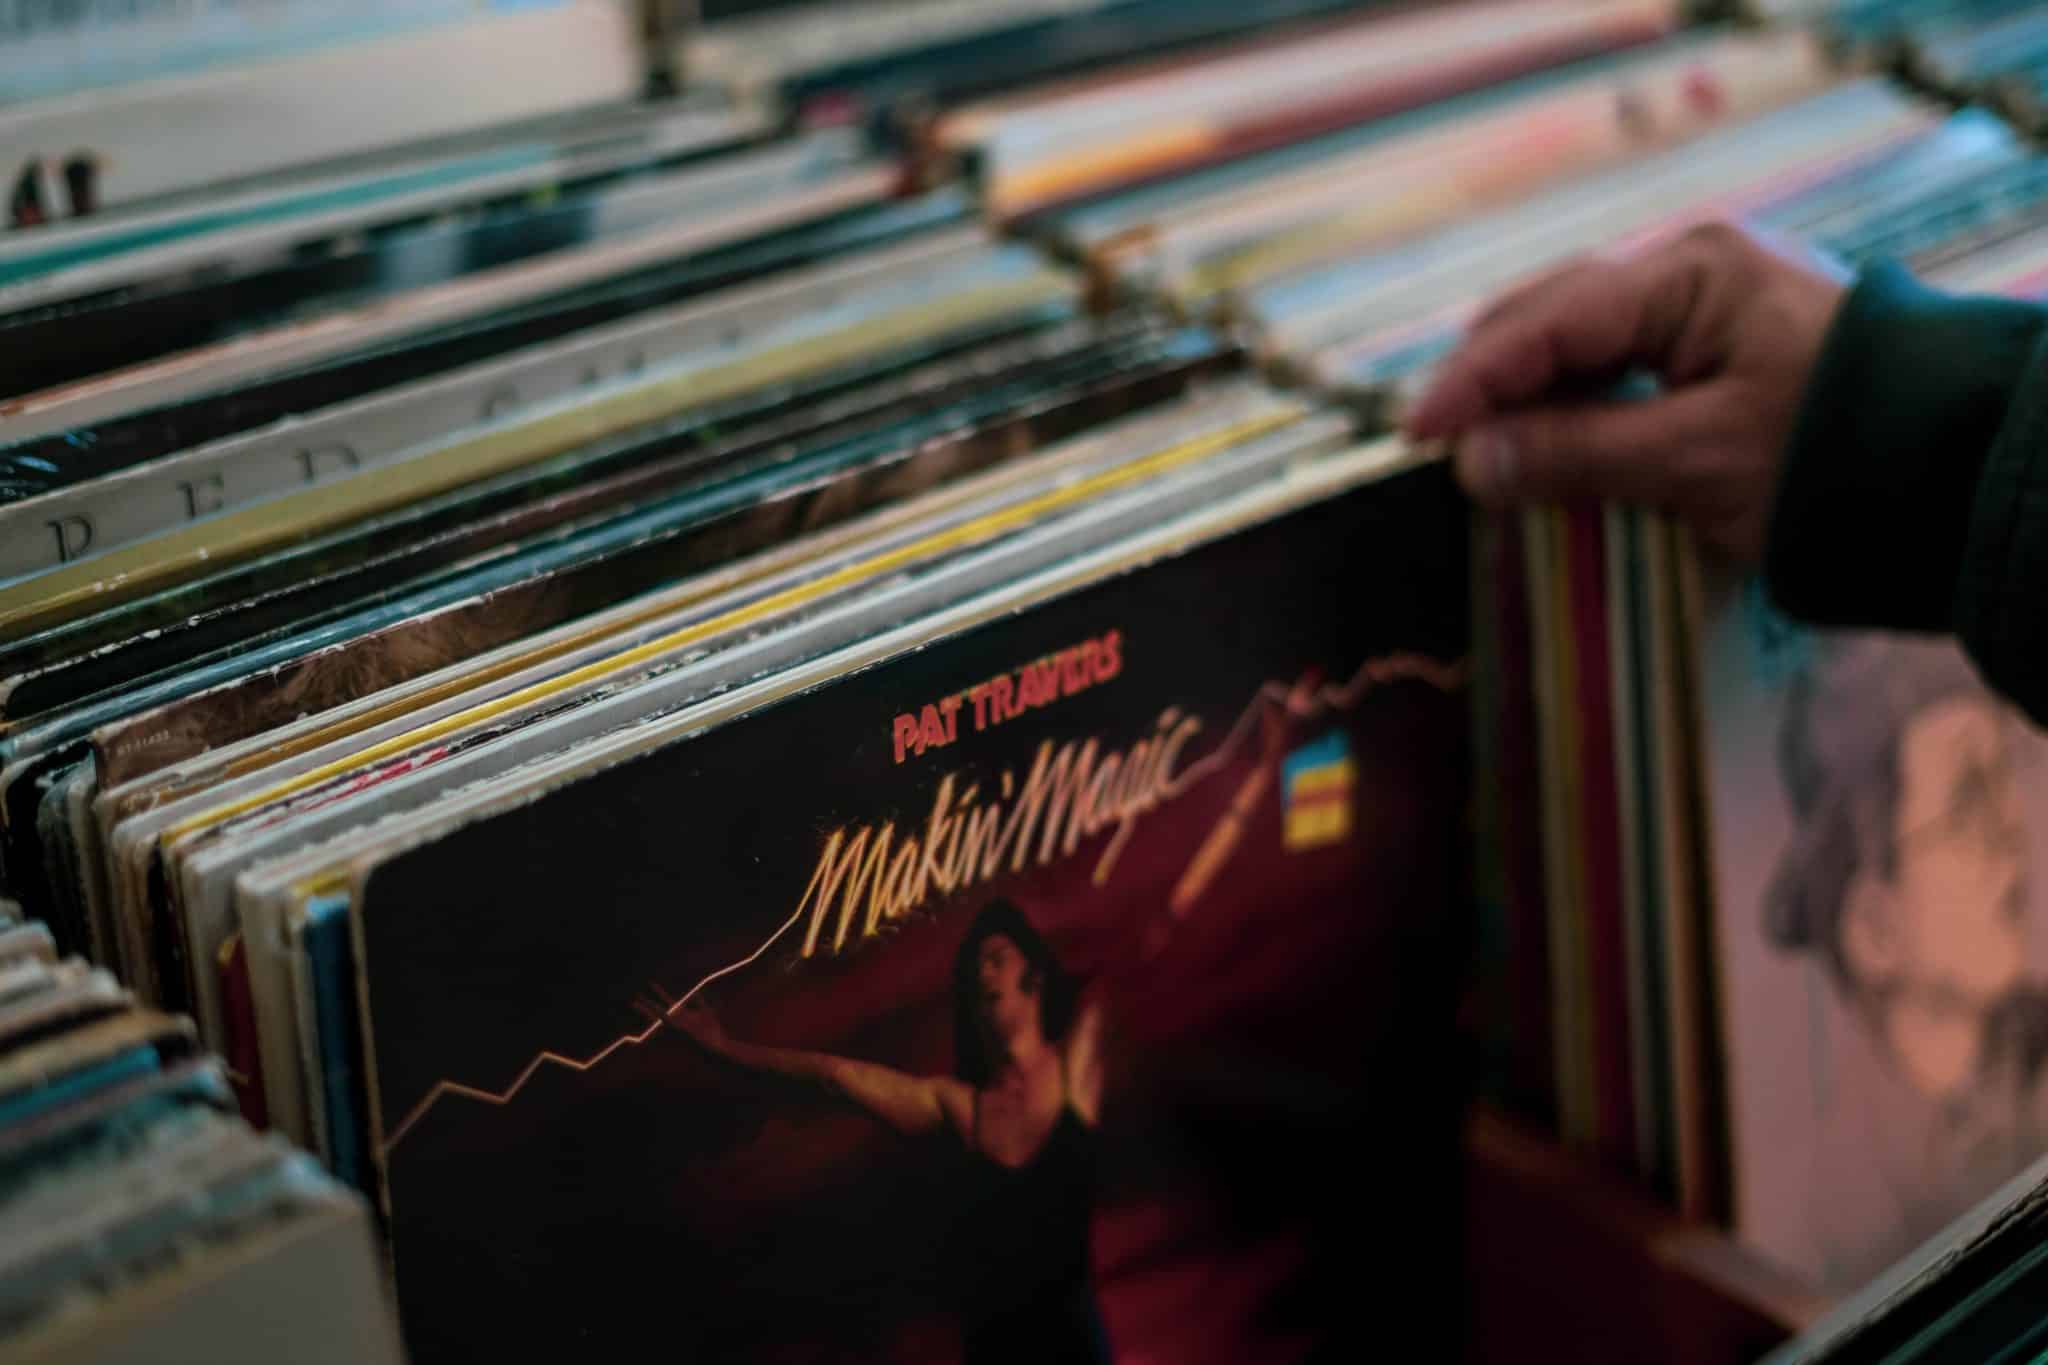 Hates Målestok underviser 8 Amsterdam Record Stores That Are Keeping Vinyl Culture Alive